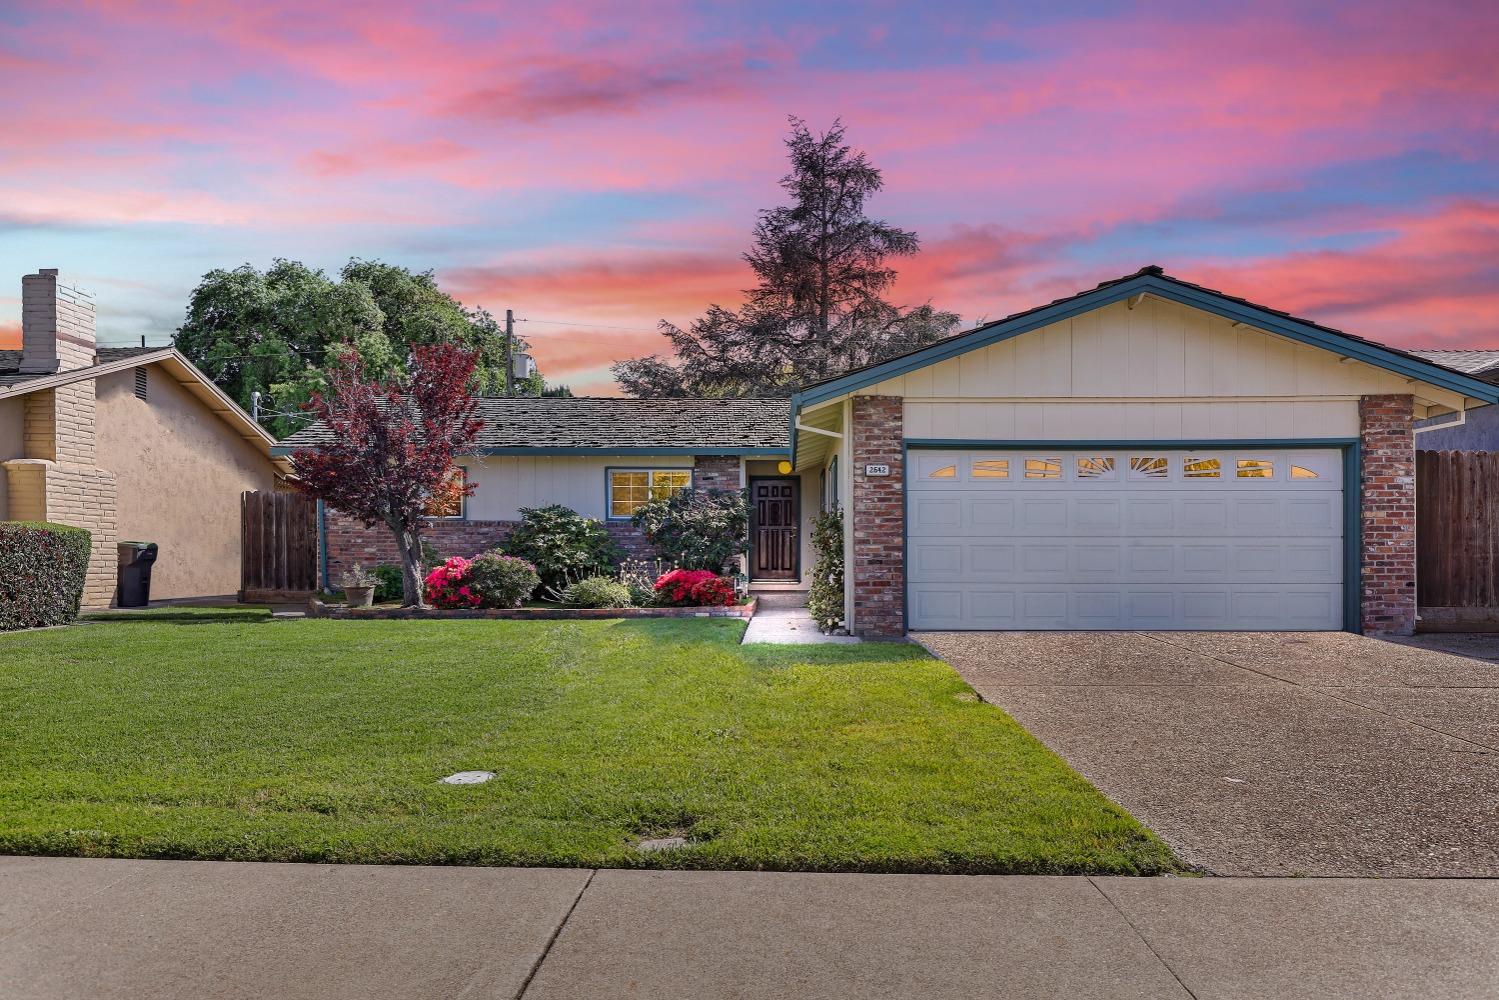 Photo of 2642 Madrone Ave in Stockton, CA